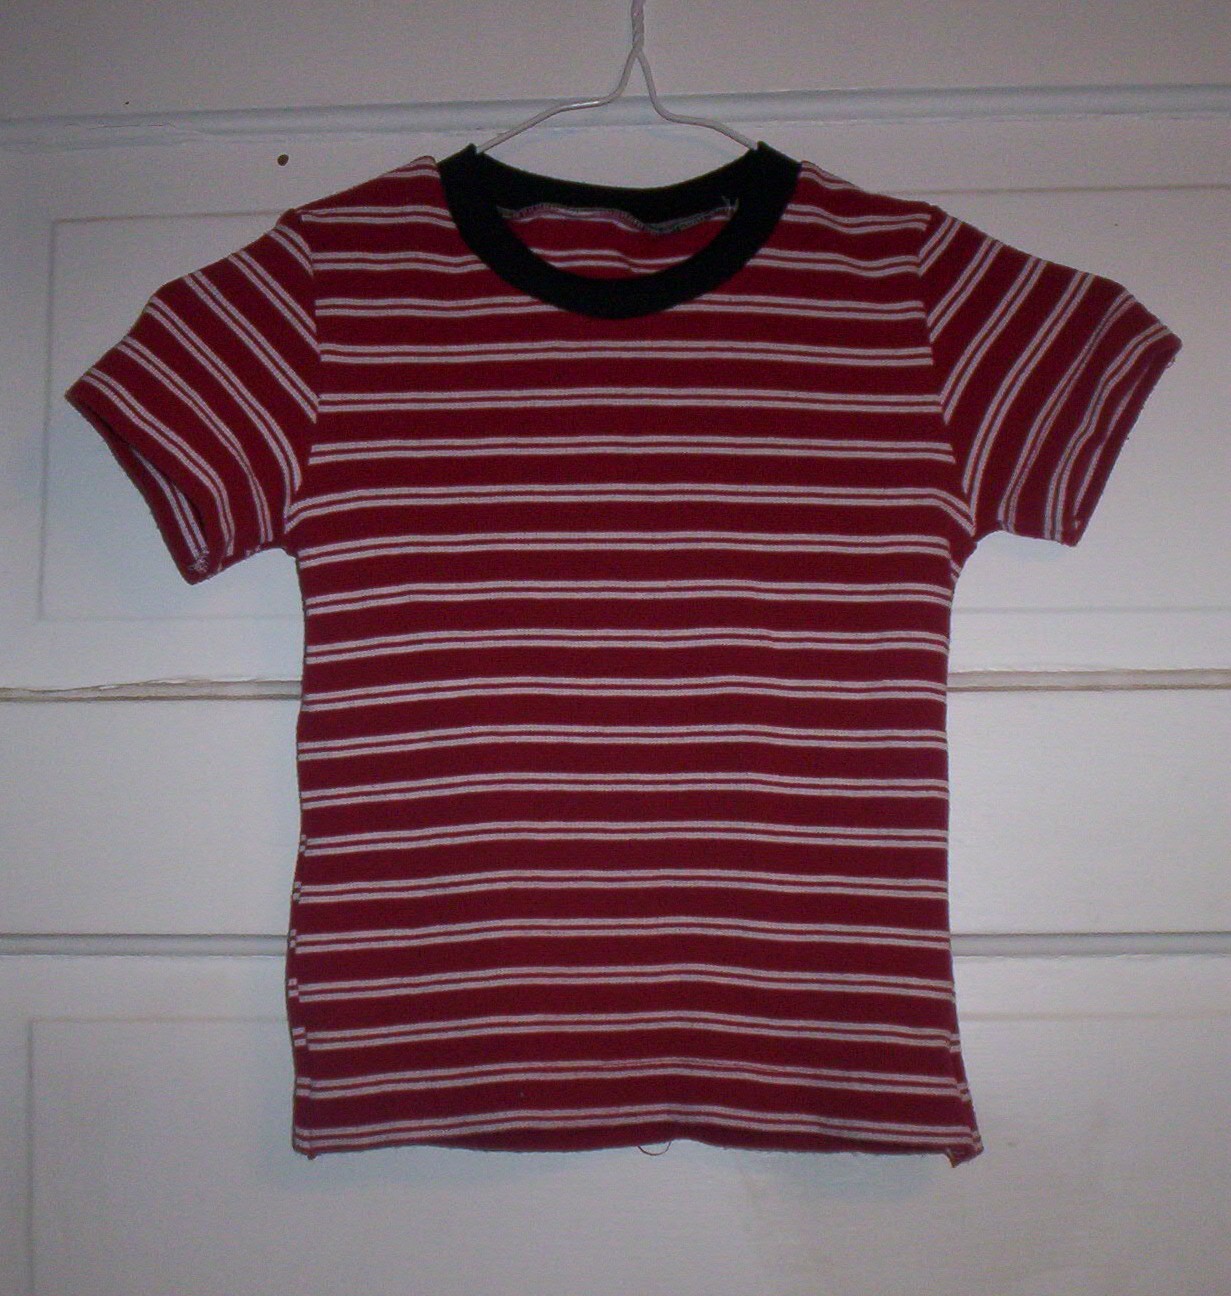 [red+striped+3T+shirt+from+vintage+Kwik+Sew+pattern+and+old+polo+shirt.jpg]